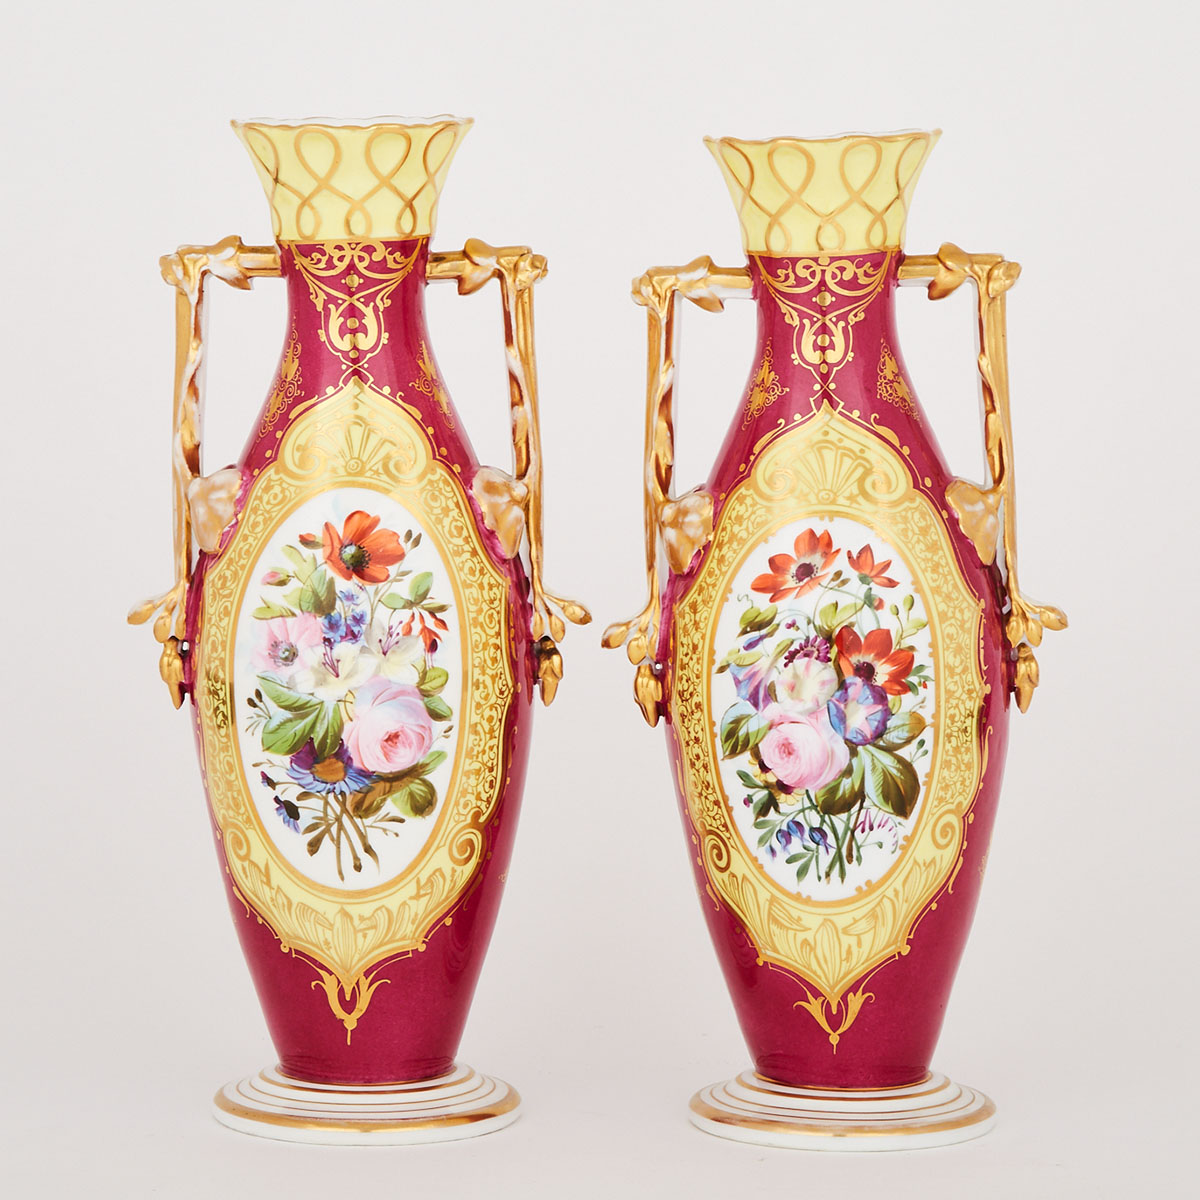 Pair of French Porcelain Claret-Ground Two Handled Vases, late 19th century